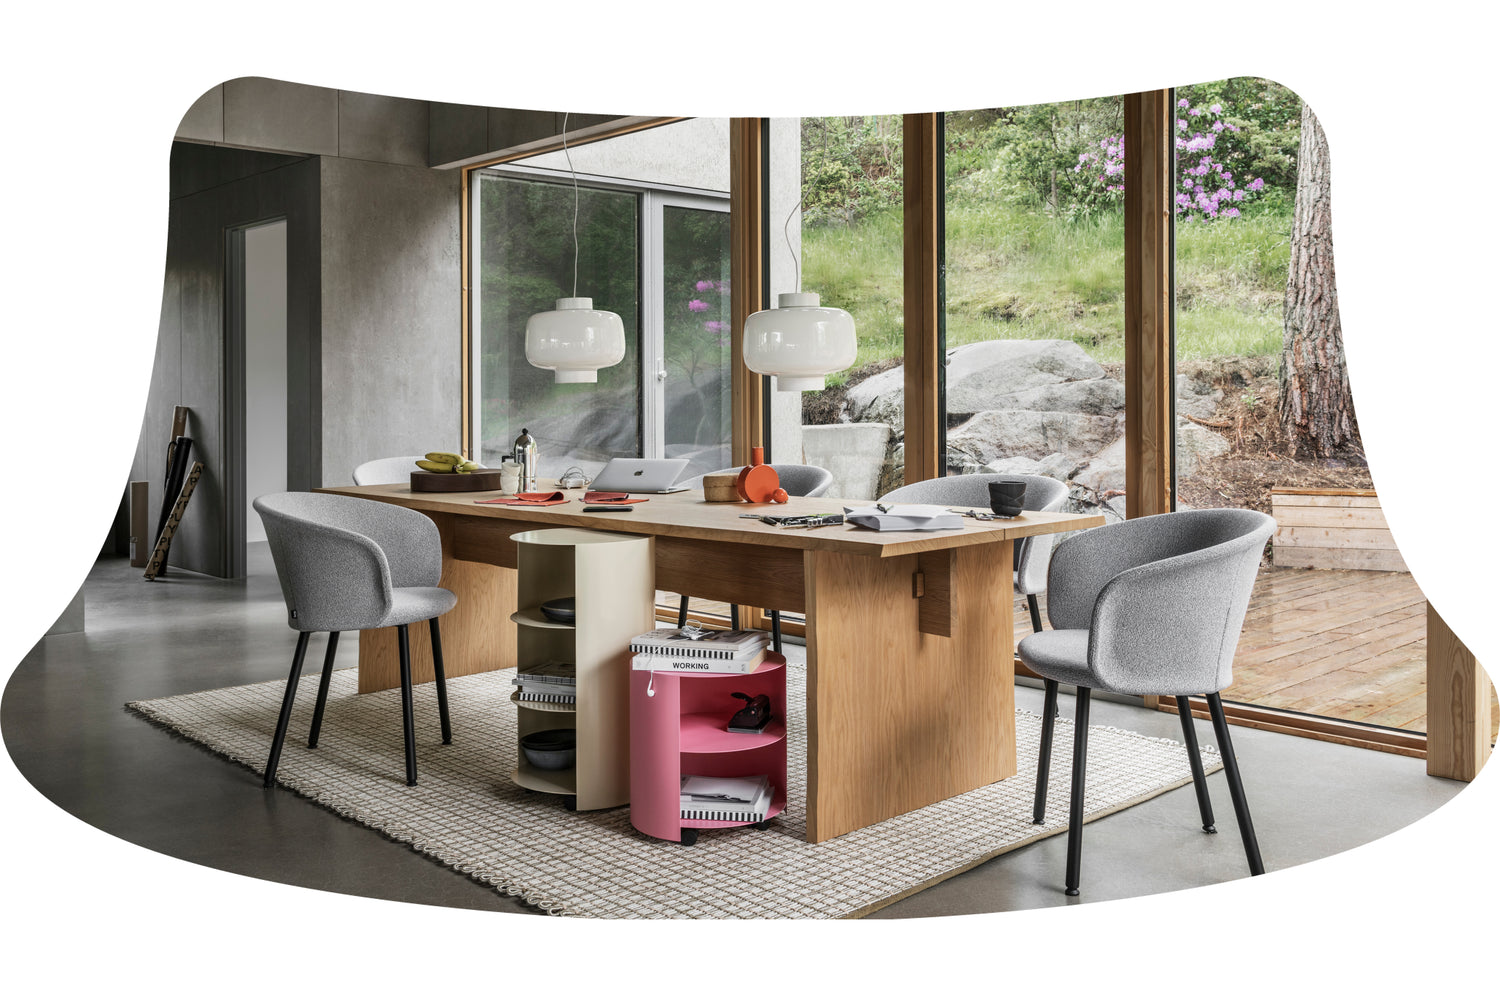 A dining scene by Hem featuring Bookmatch Table Oak, Kendo Chair Porcelain, Dusk Lamp Large Ivory, Hide Side Table Pink, Hide Pedestal Ivory, and Rope Rug Seaweed.